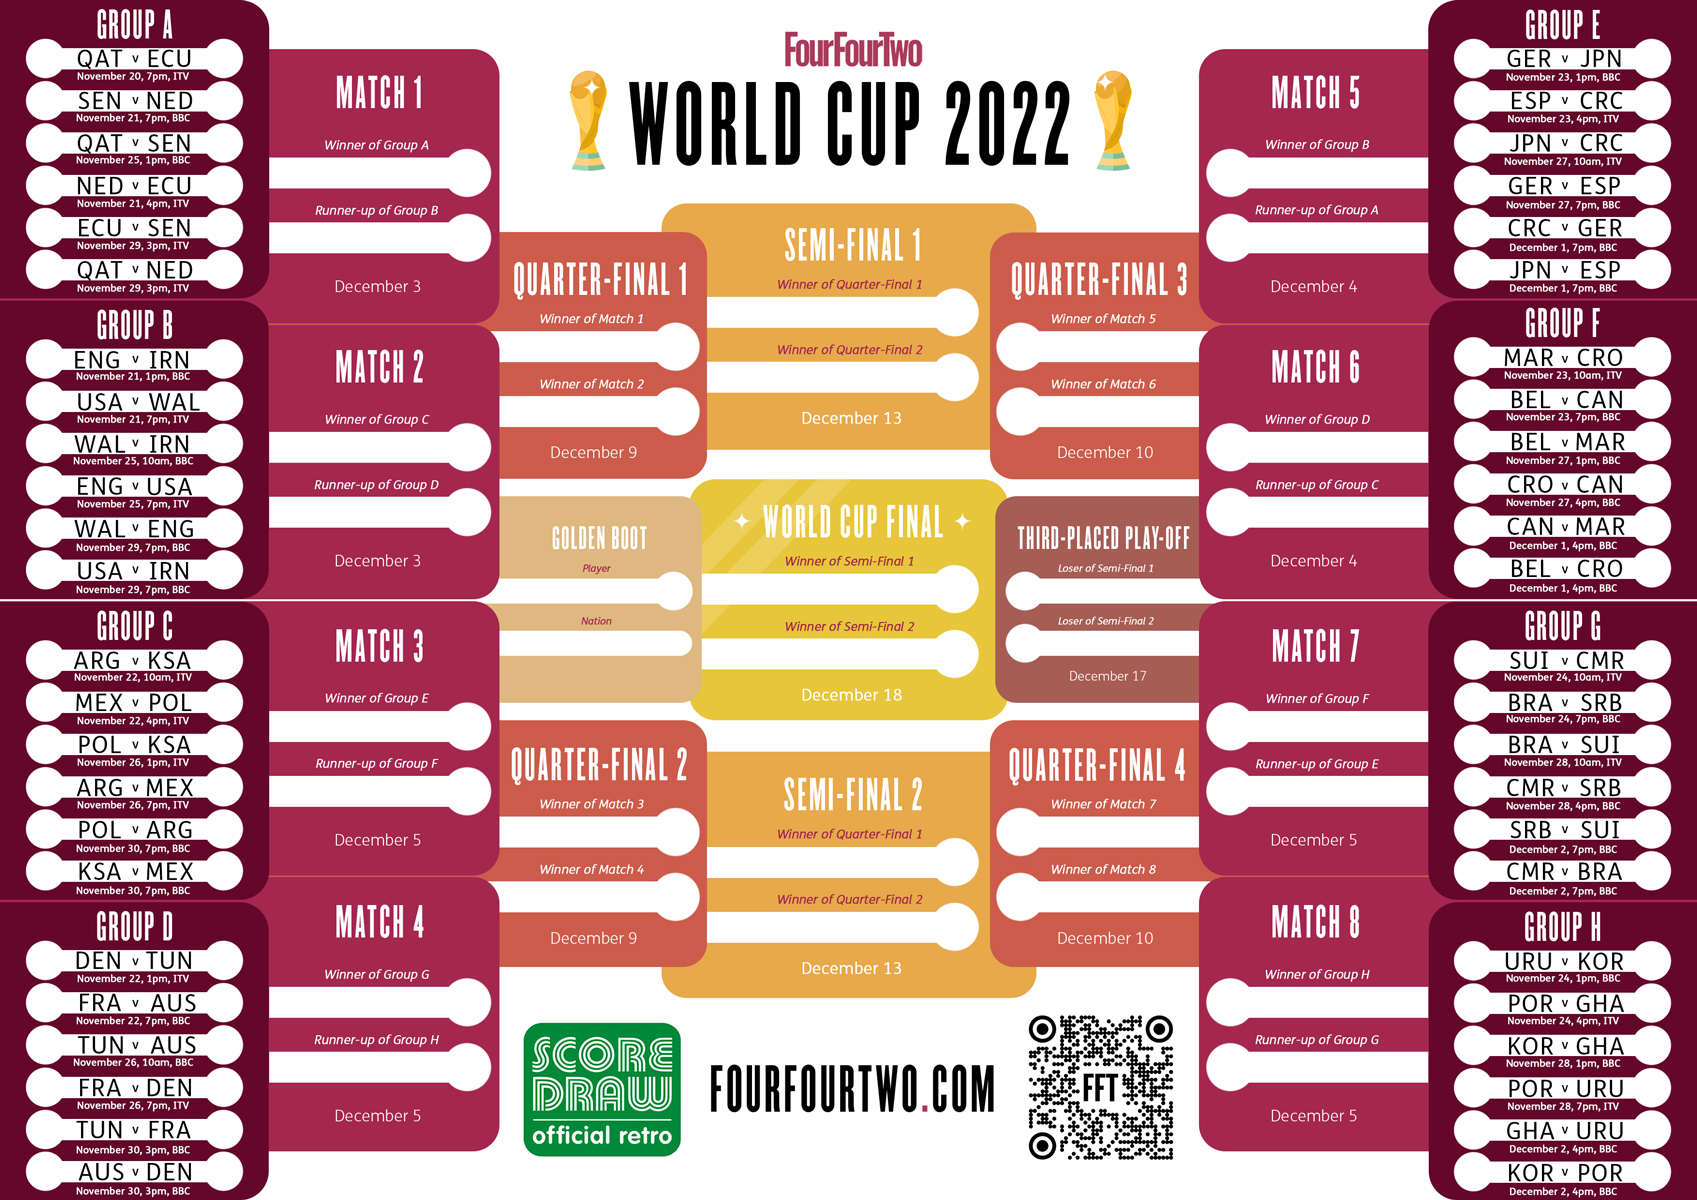 World Cup 2022 wall chart: Free download with full schedule | FourFourTwo